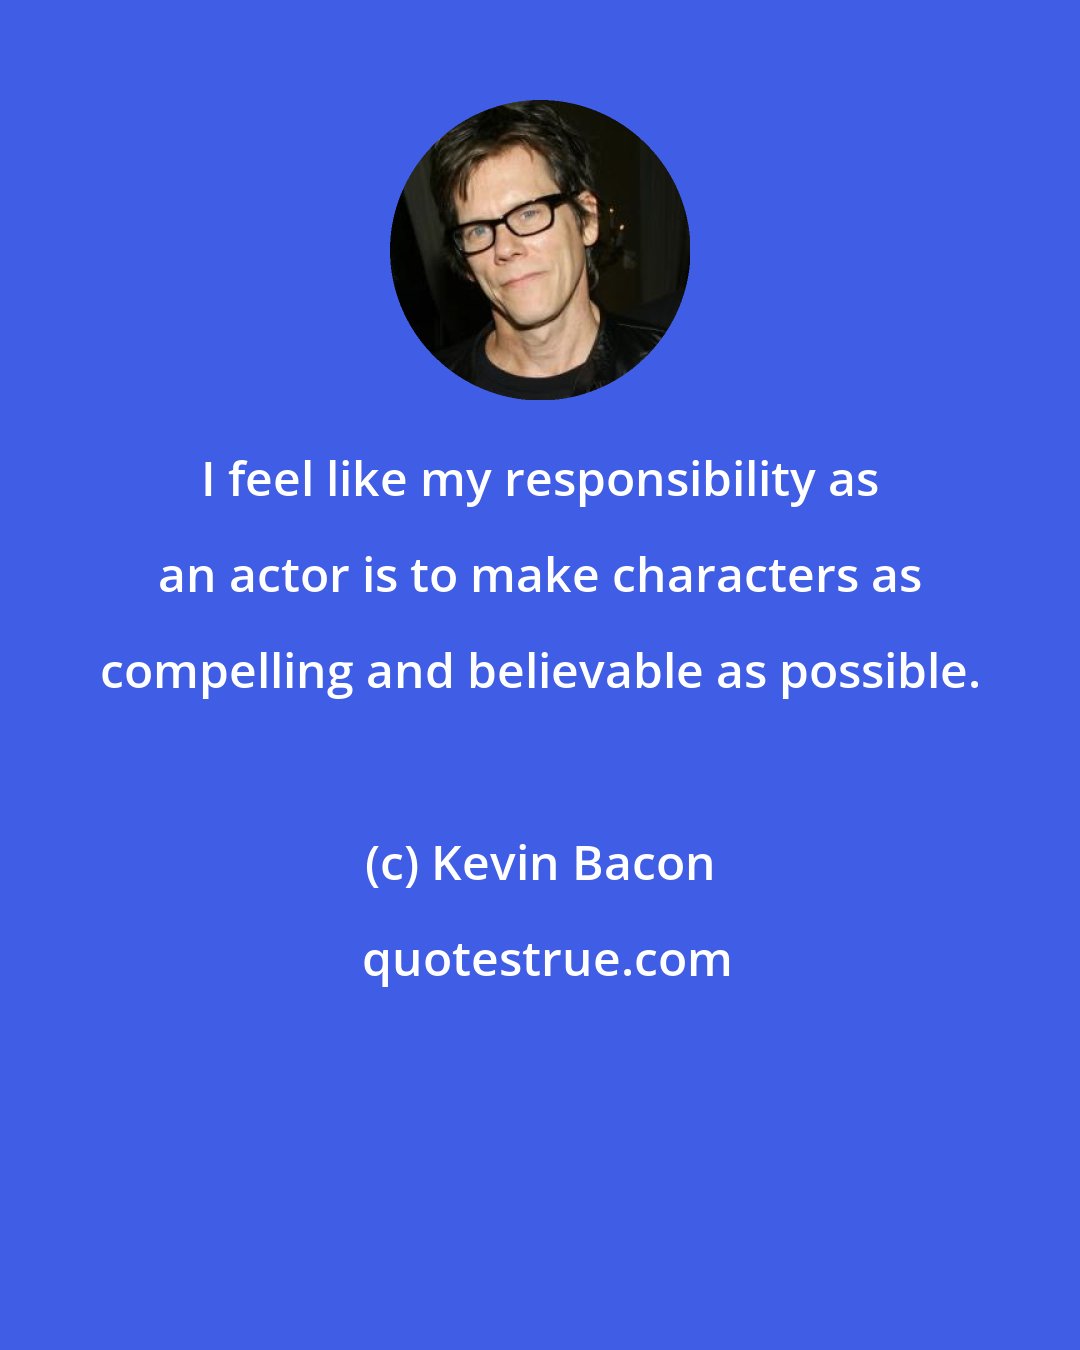 Kevin Bacon: I feel like my responsibility as an actor is to make characters as compelling and believable as possible.